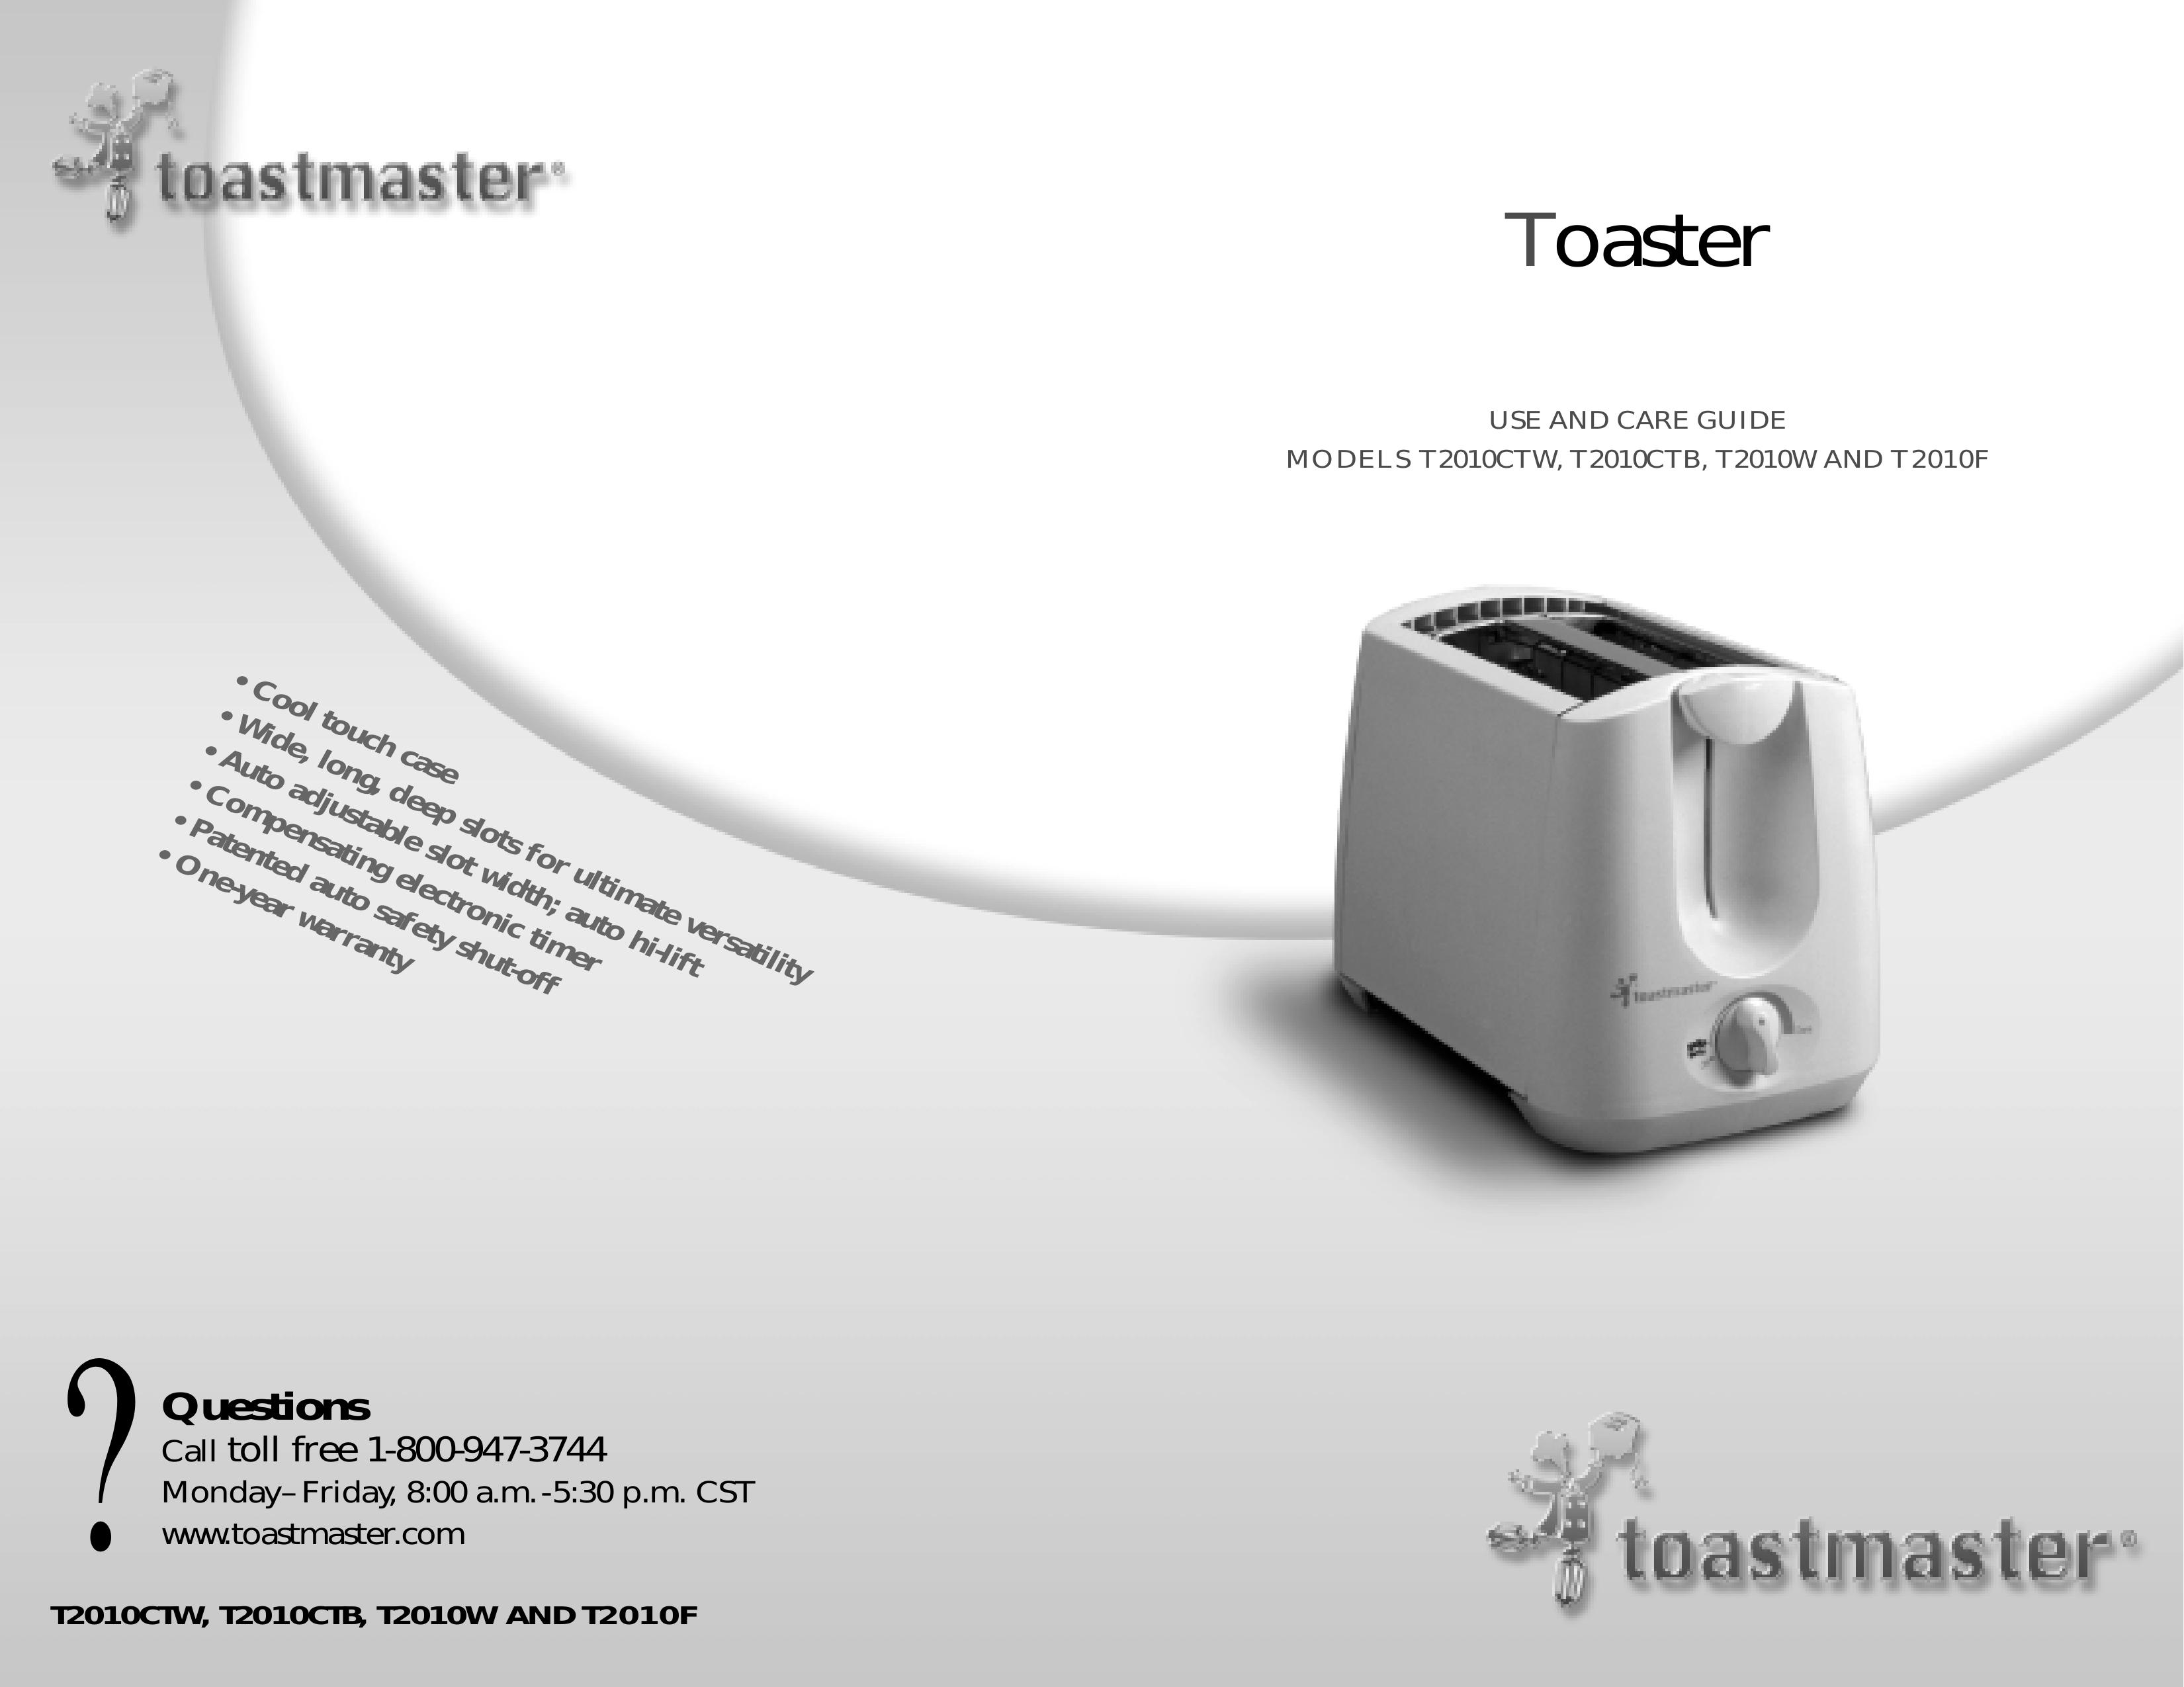 Toastmaster T2010F Toaster User Manual